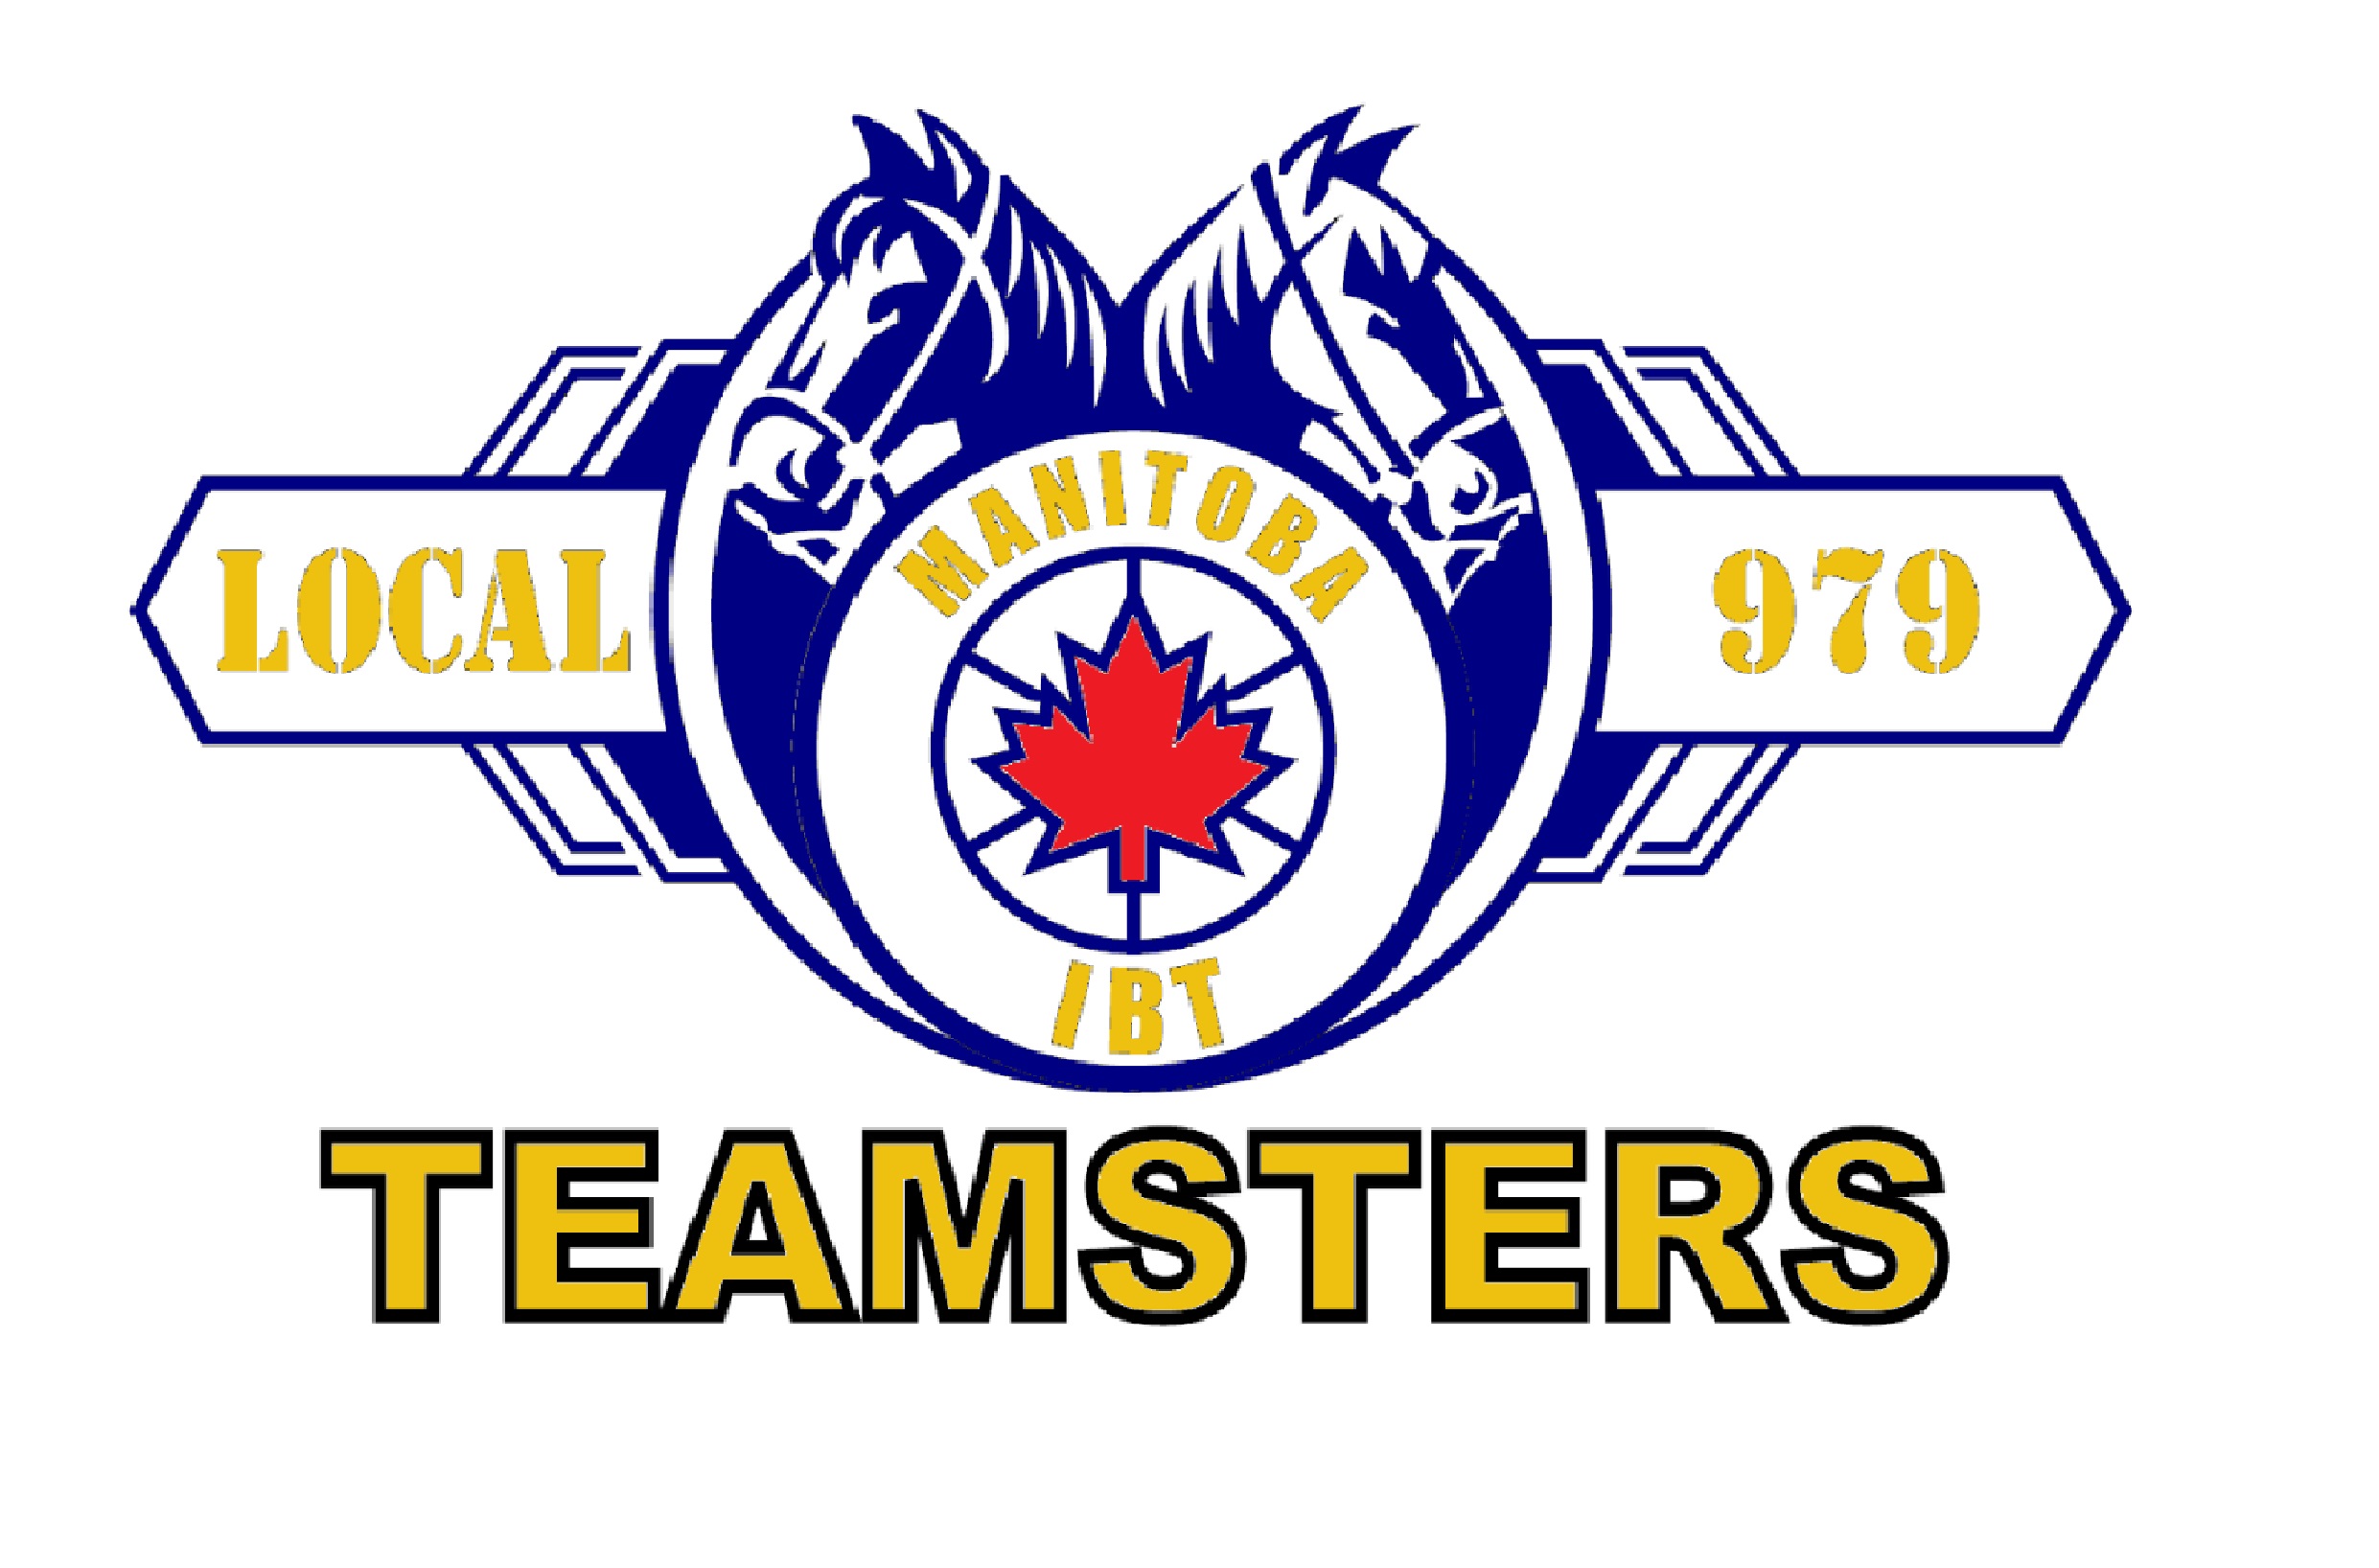 Teamsters local union 979